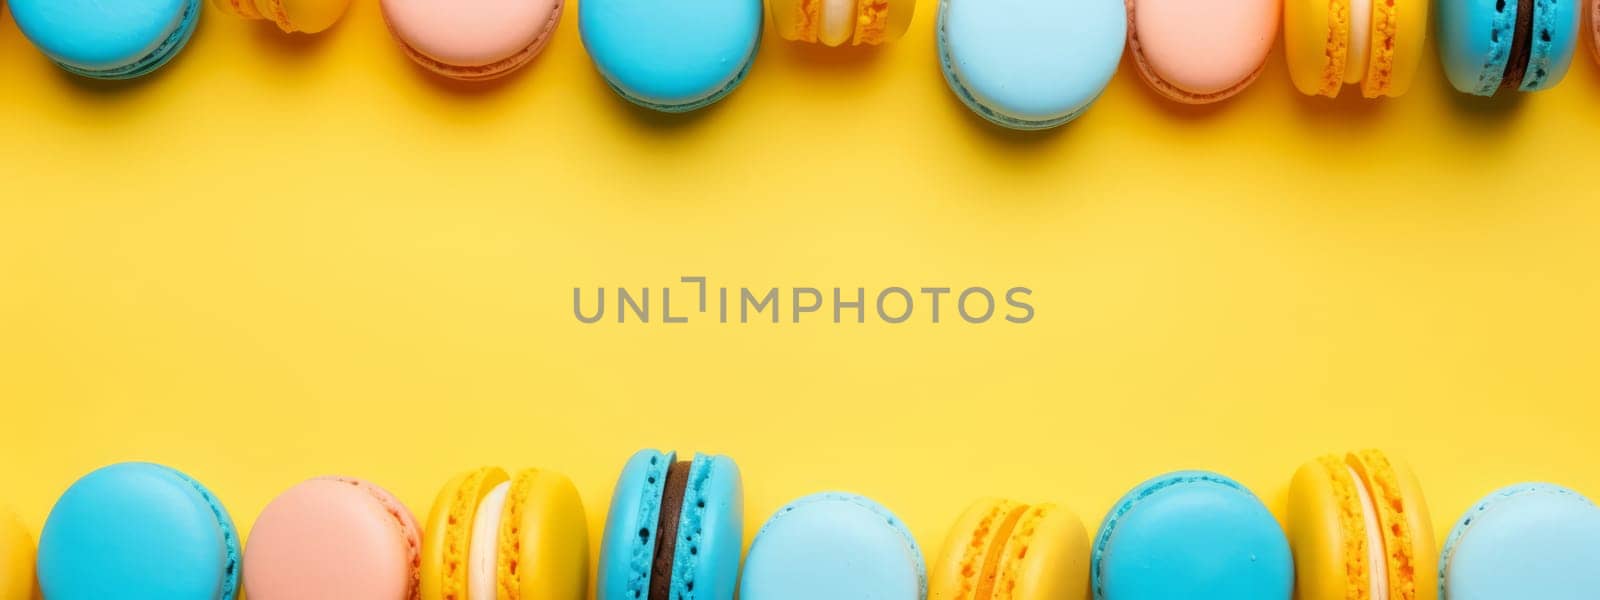 Top view of colorful macaron or macaroon on yellow background. Flat lay